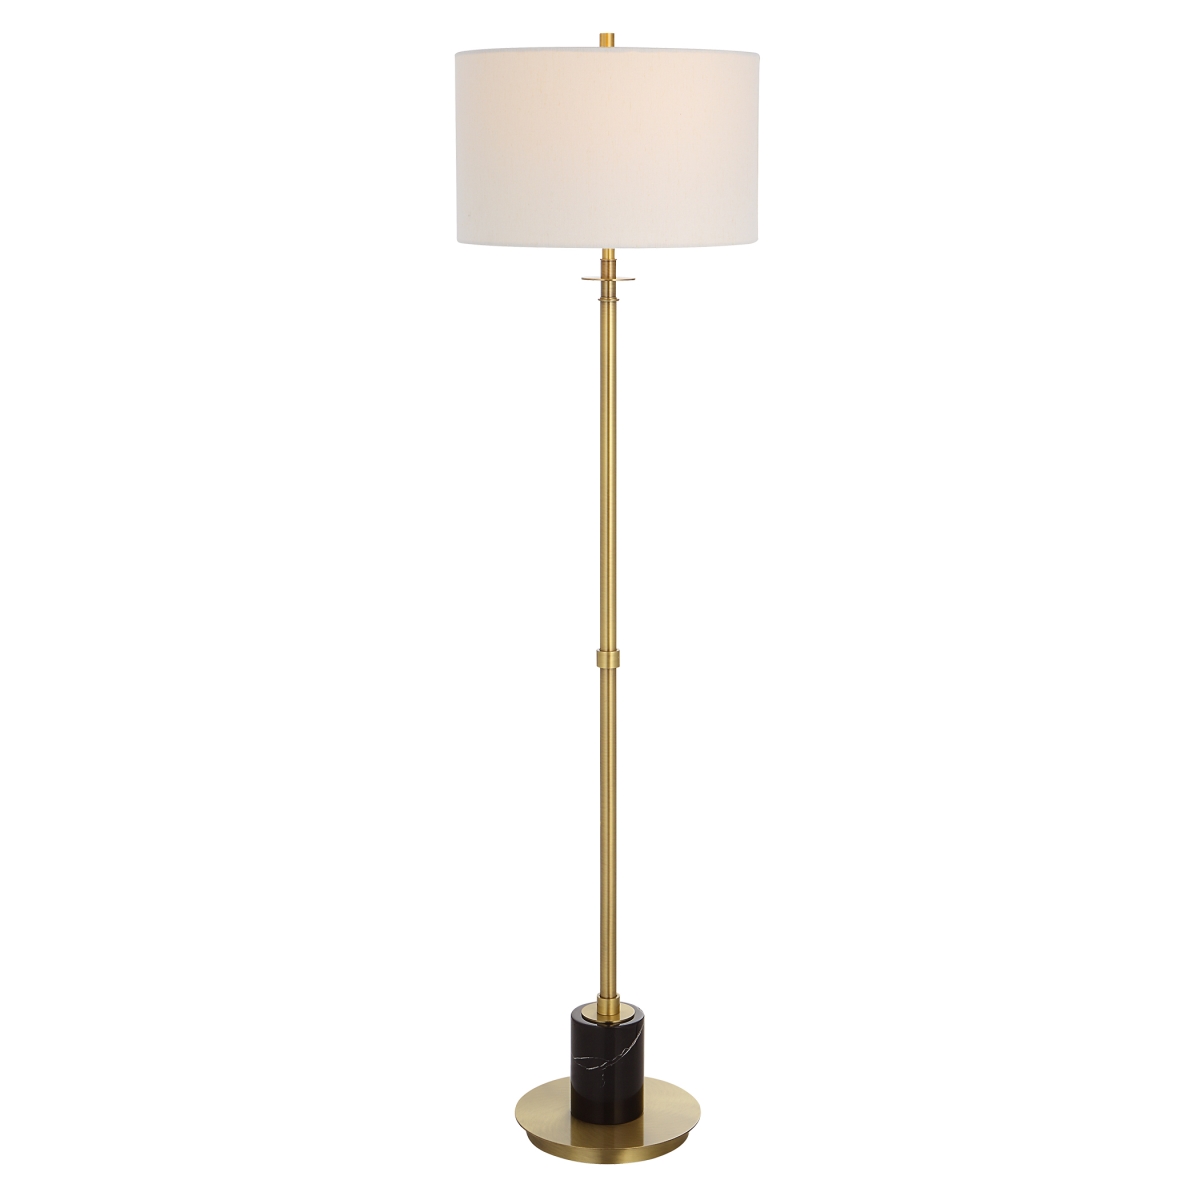 30137-1 65 in. 150W Guard Brass Floor Lamp, Antiqued Plated Brass & Black Marble -  Uttermost